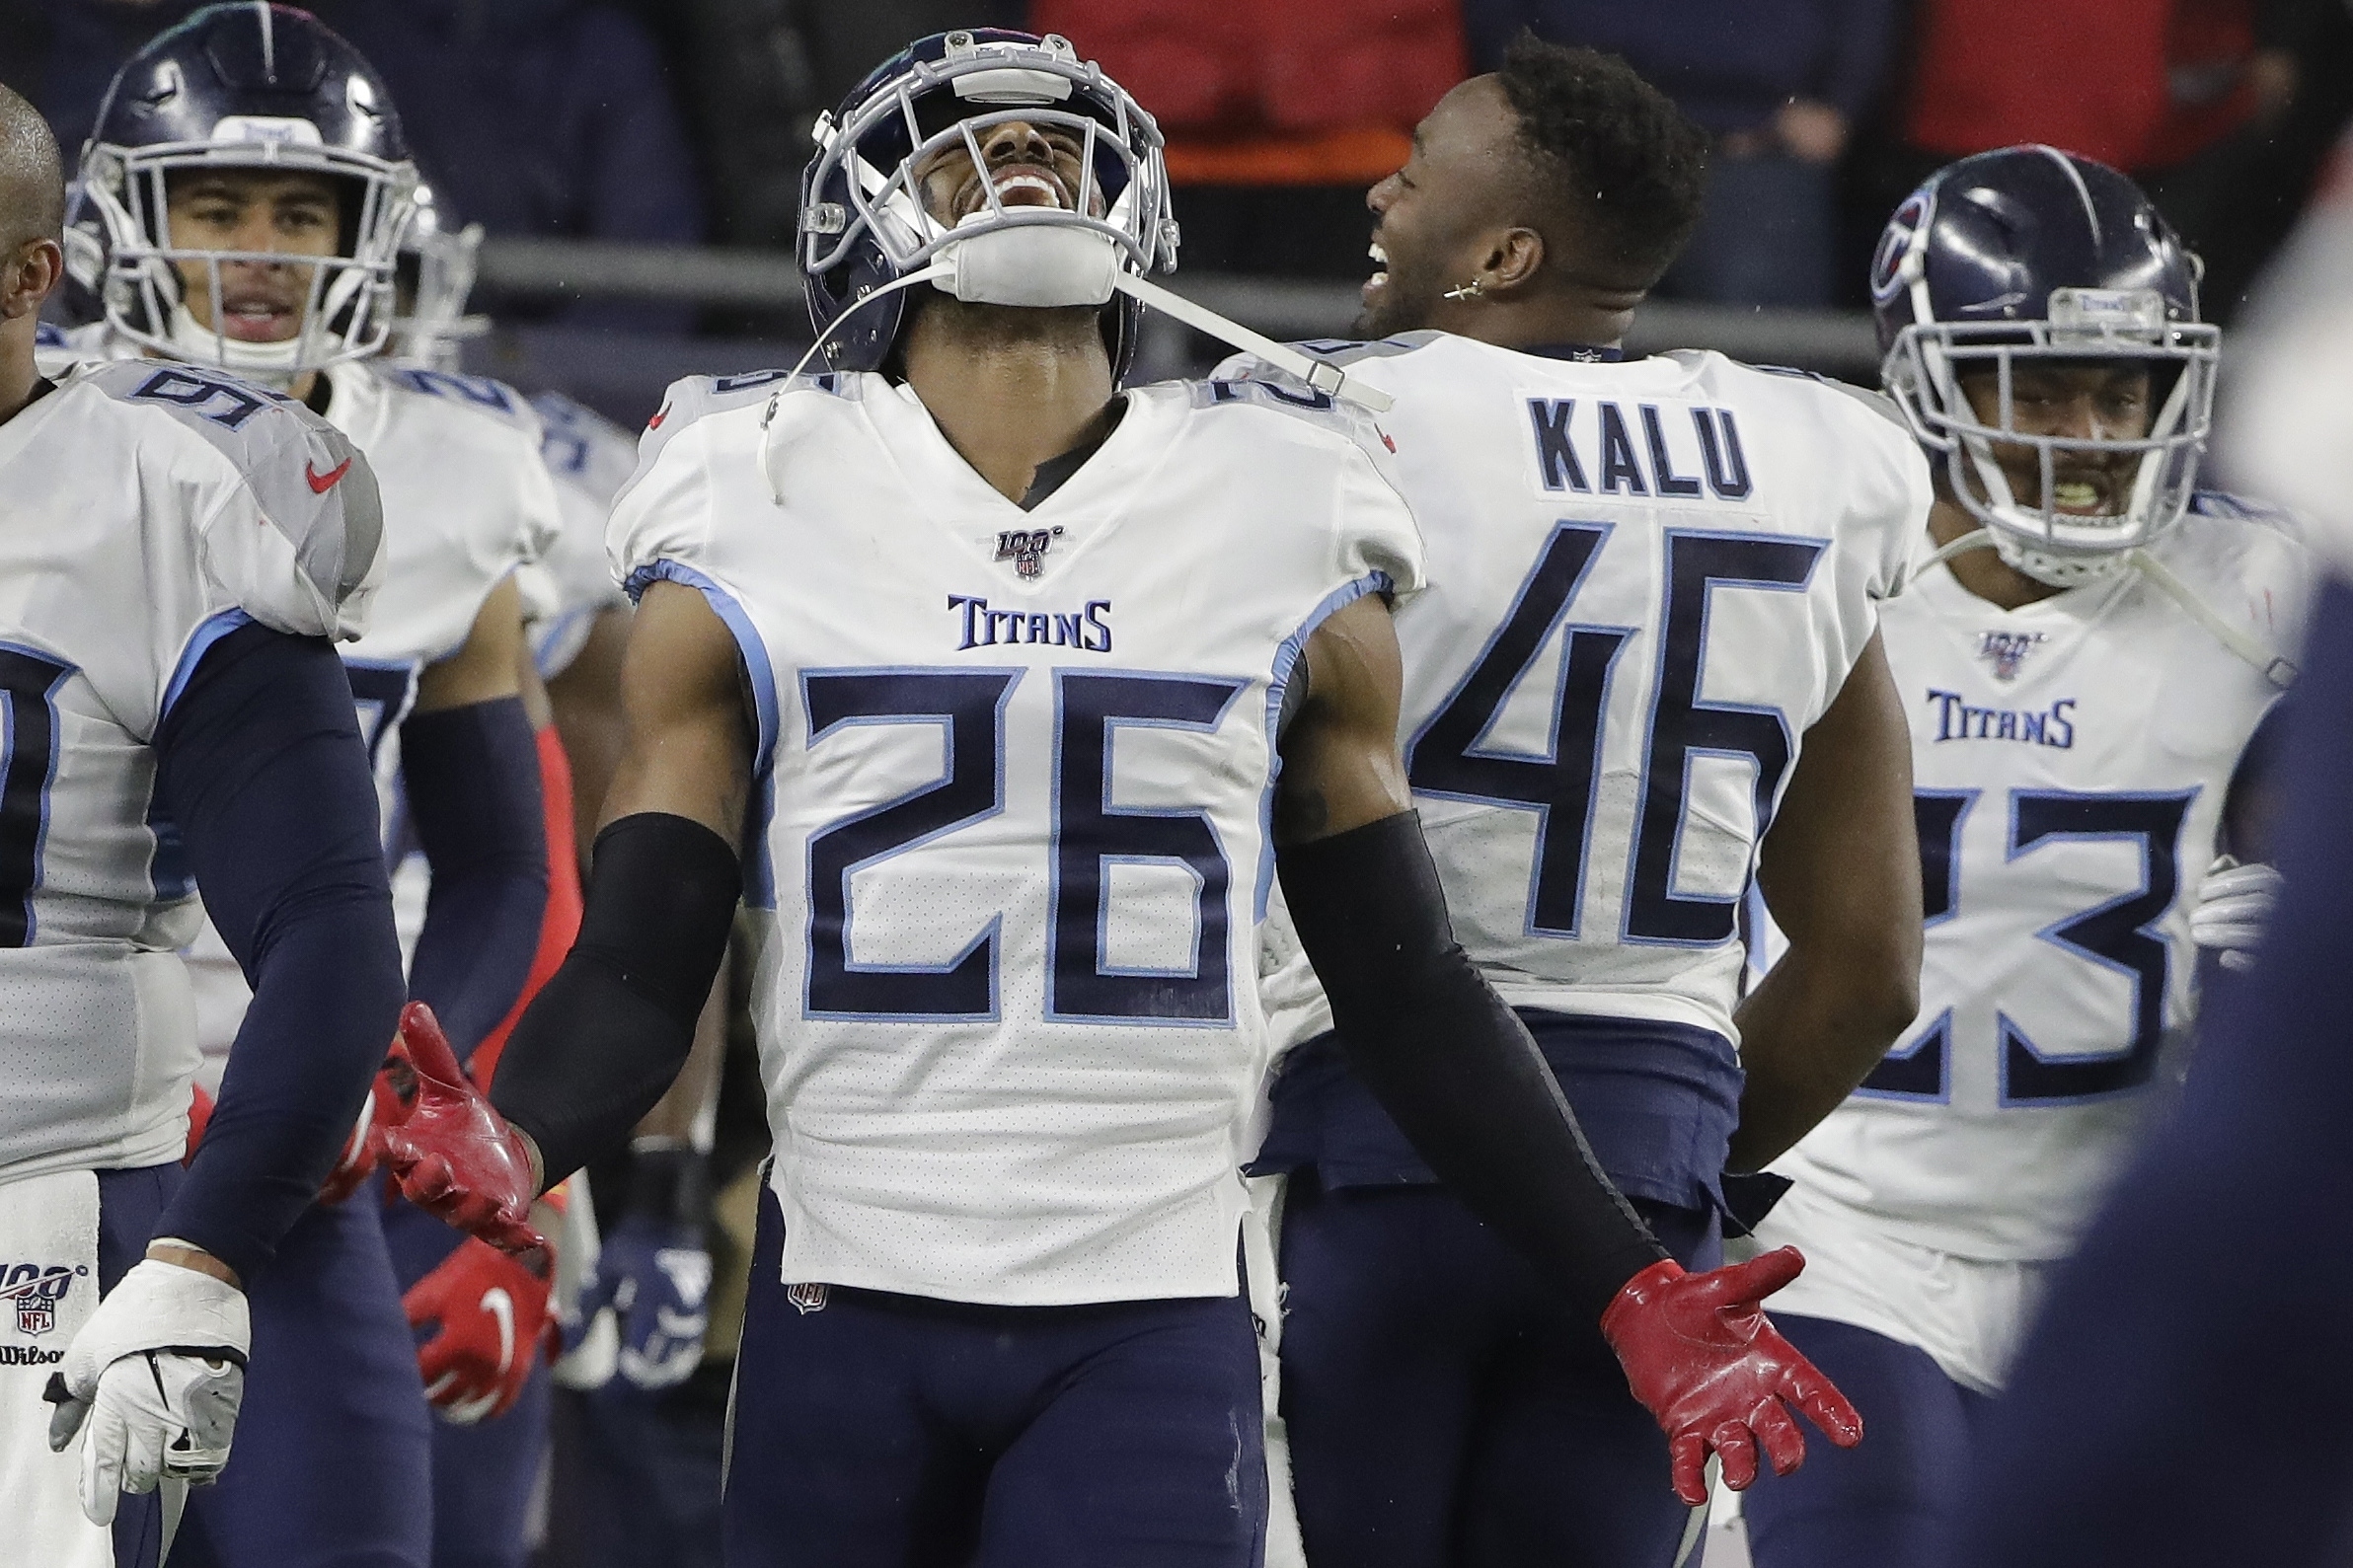 With Henry, Titans ready to mash through playoffs